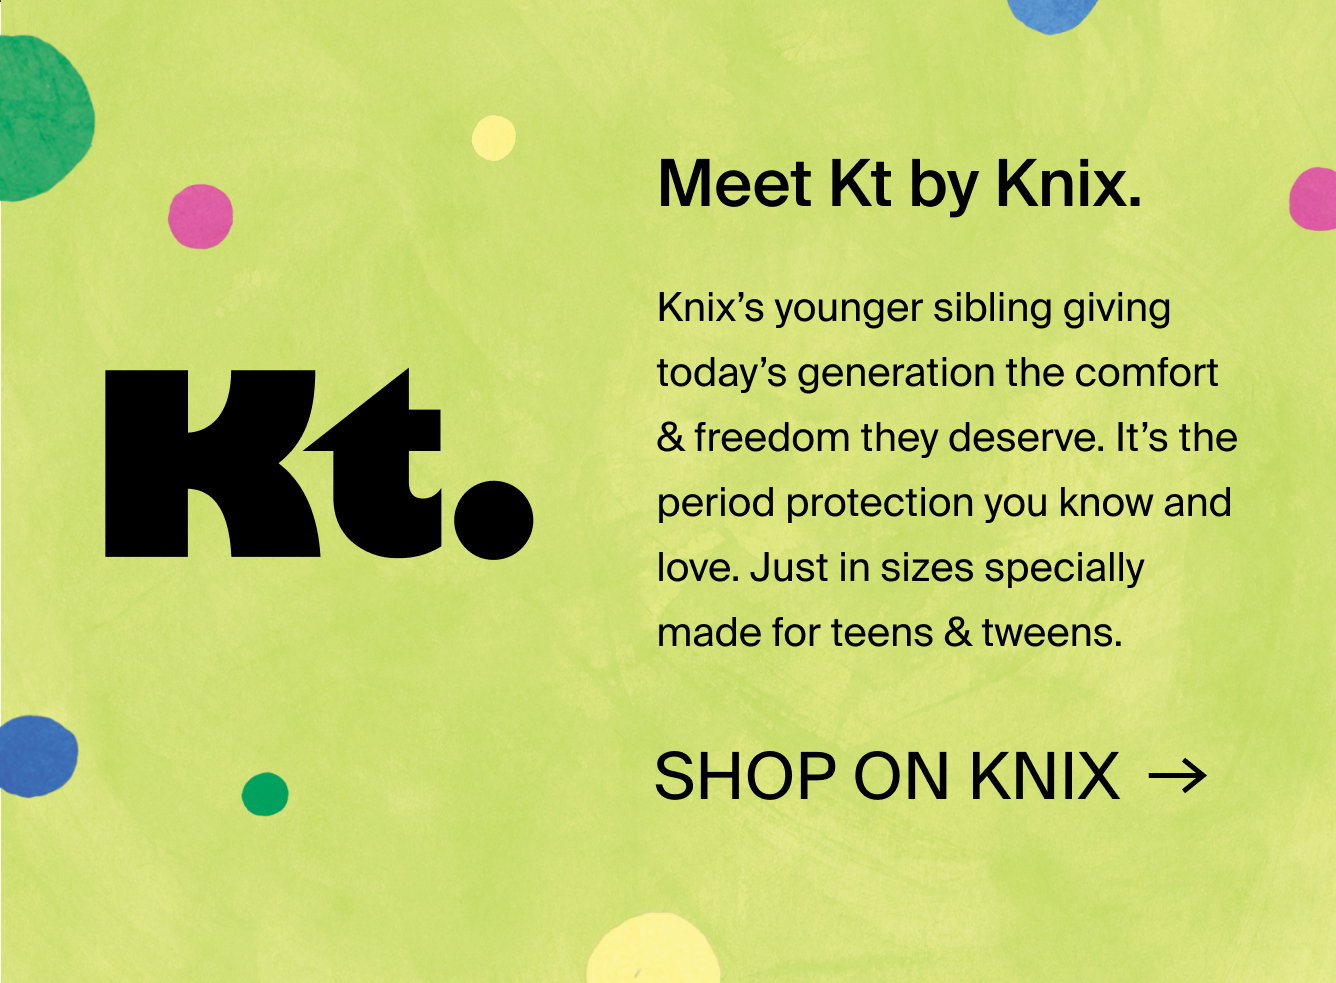 Kt by Knix - Kt by Knix updated their cover photo.